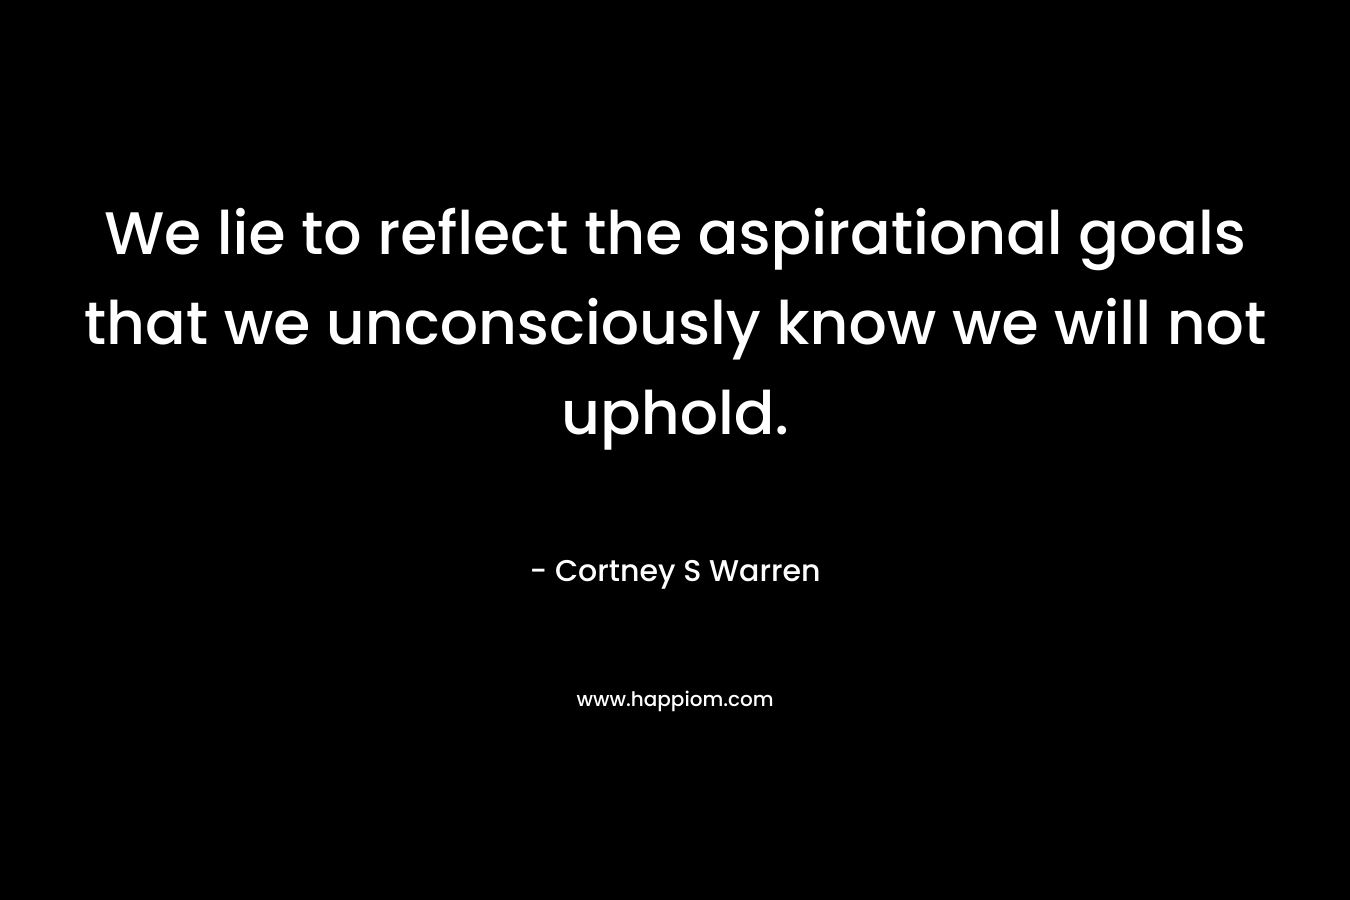 We lie to reflect the aspirational goals that we unconsciously know we will not uphold. – Cortney S Warren